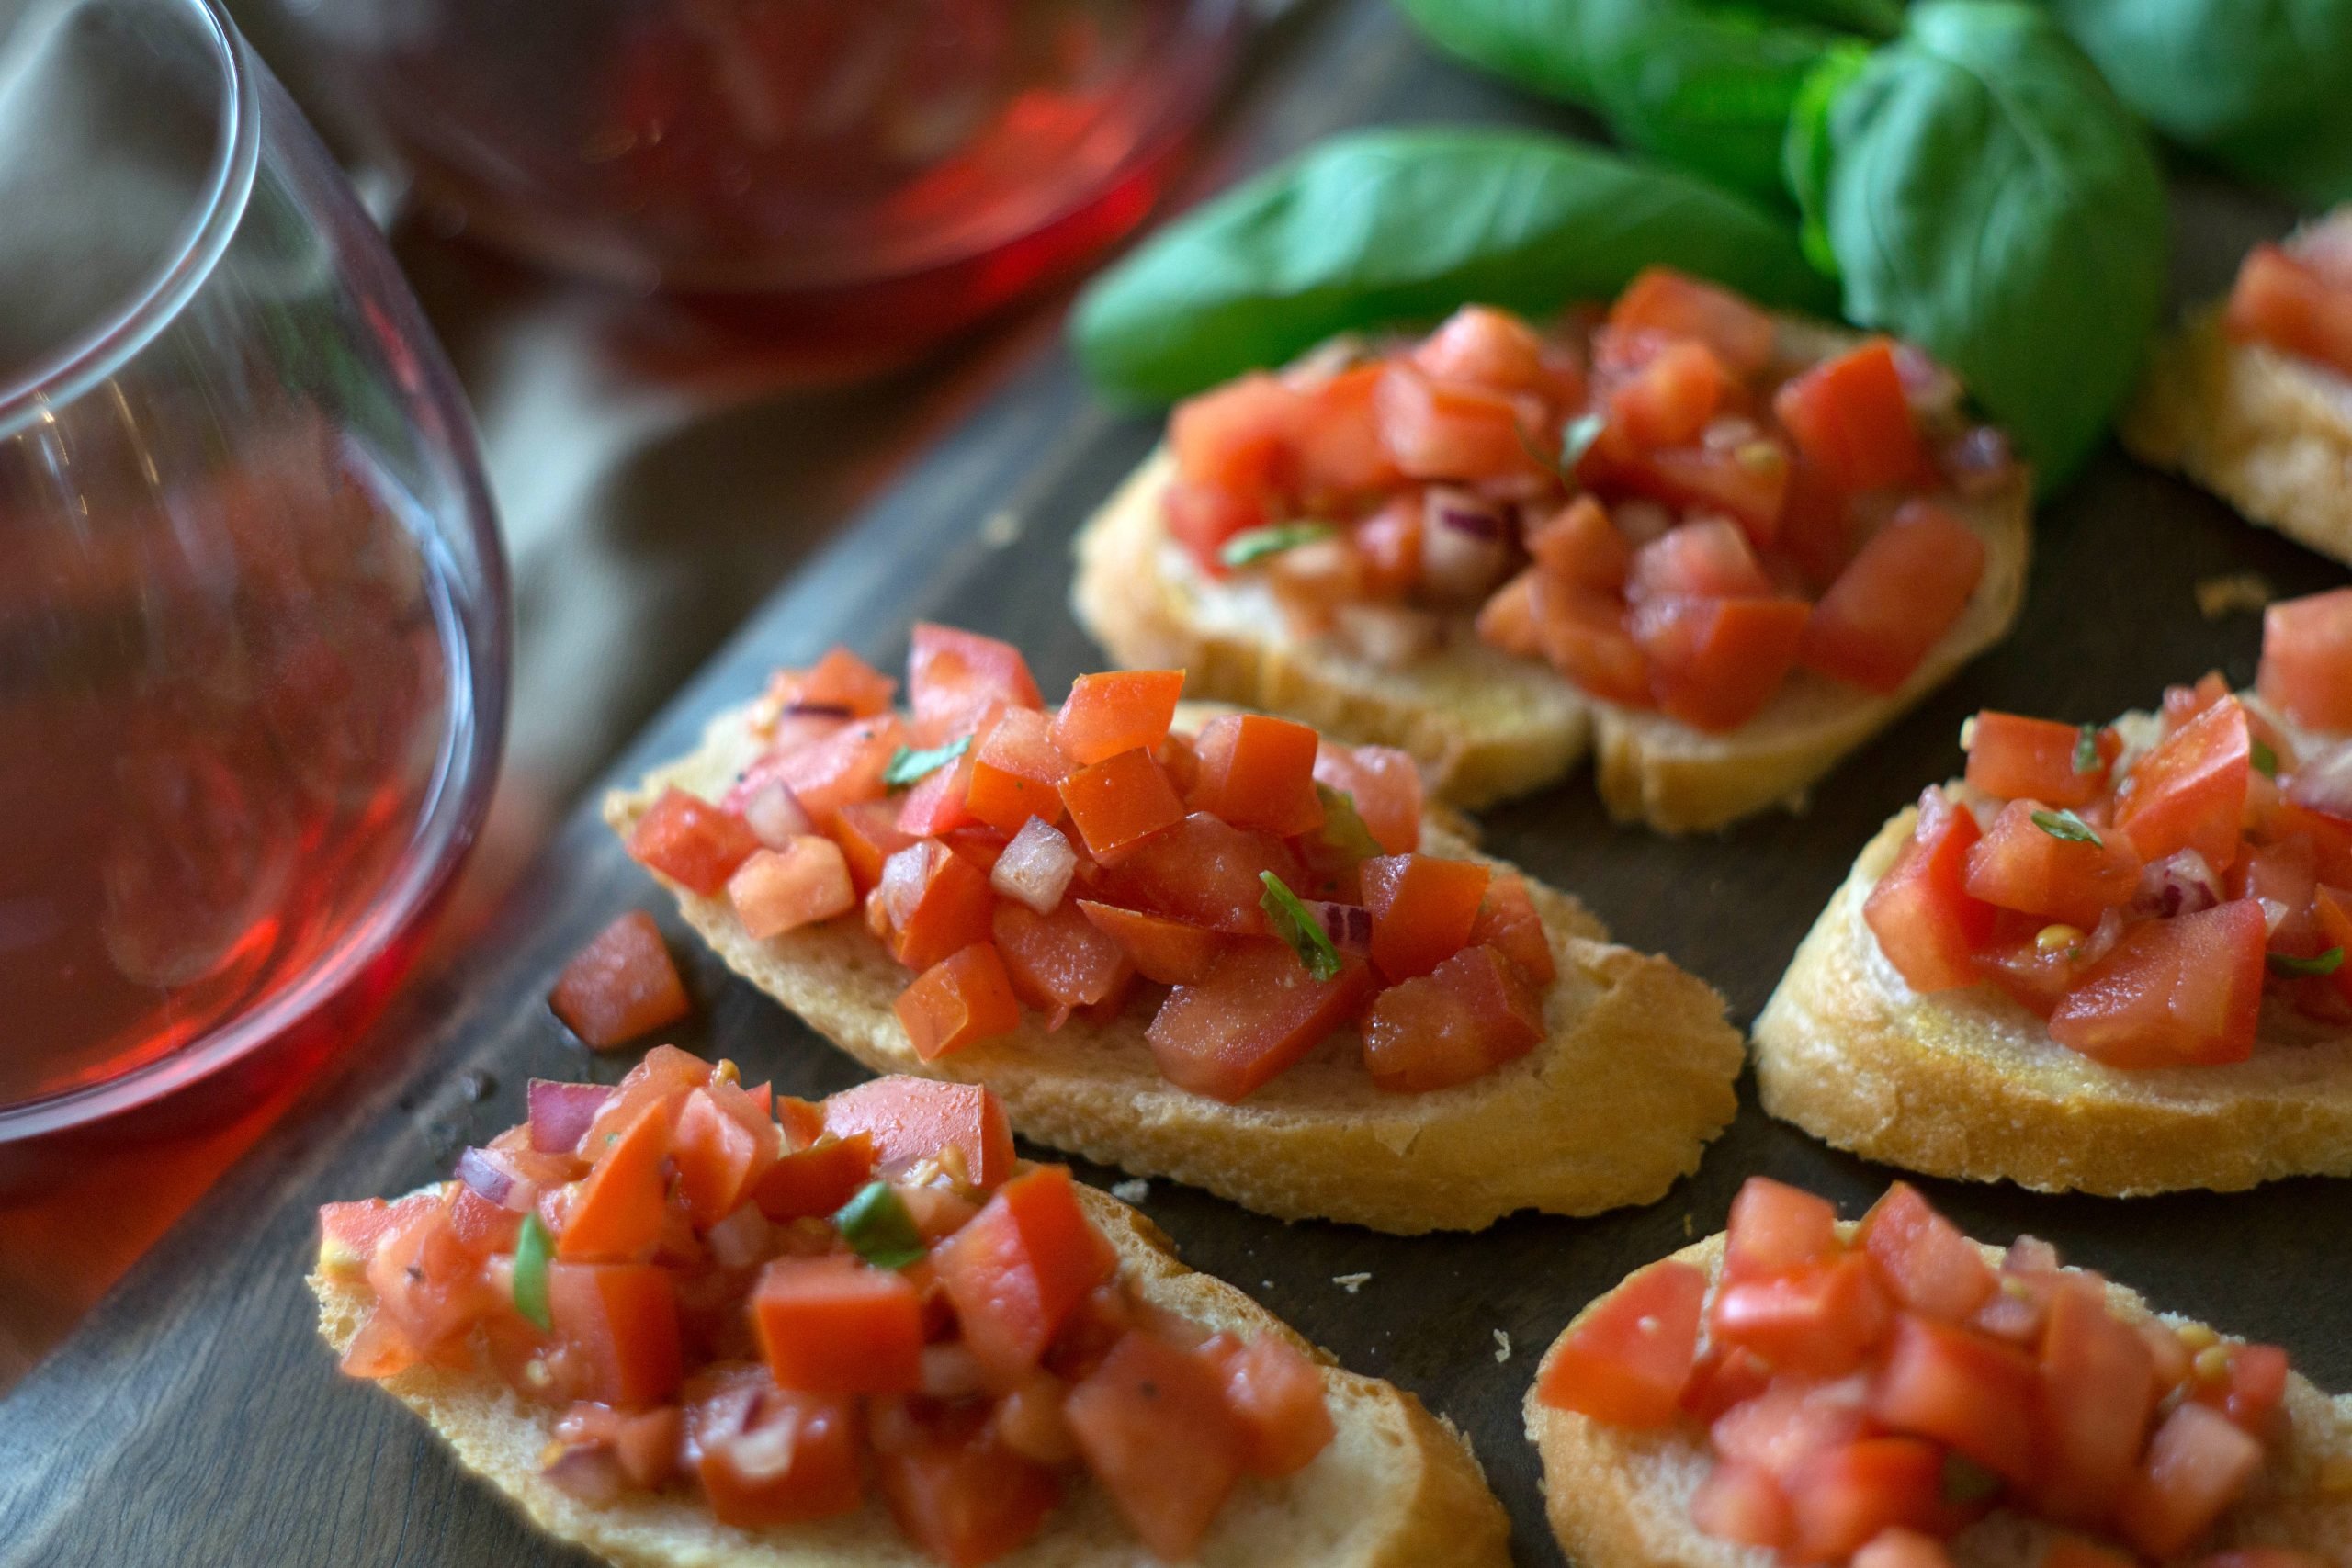 Slices of bread with chopped tomatoes